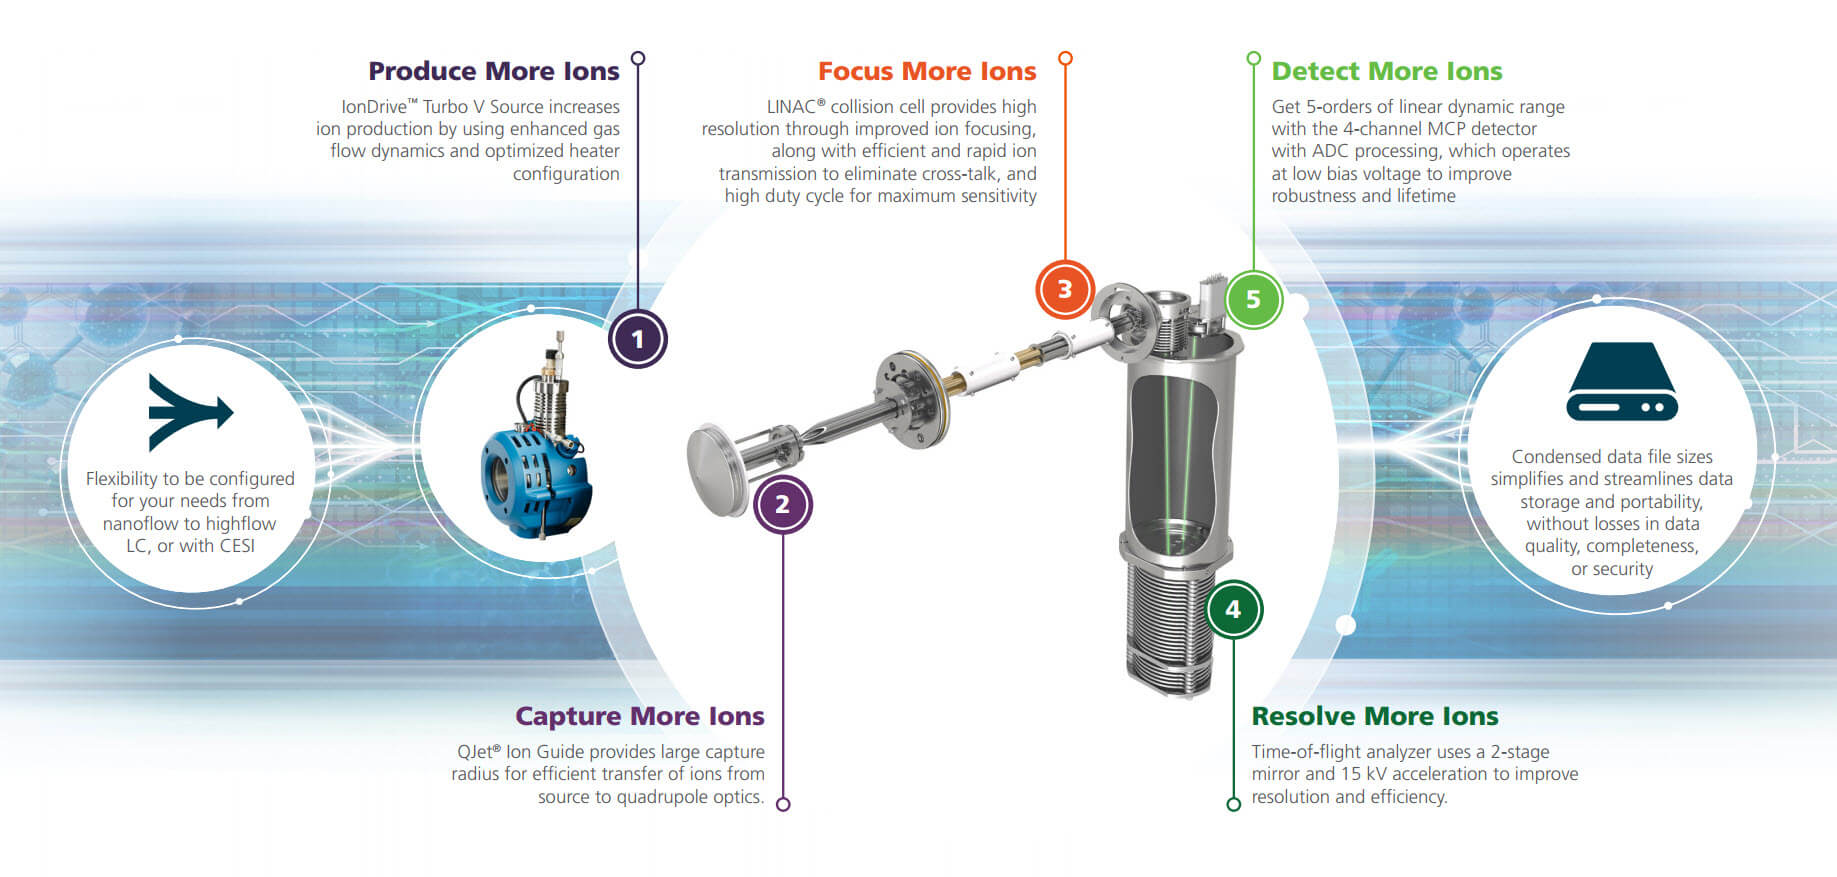 Take on New Analytical Challenges with the TripleTOF 6600 Accurate Mass System